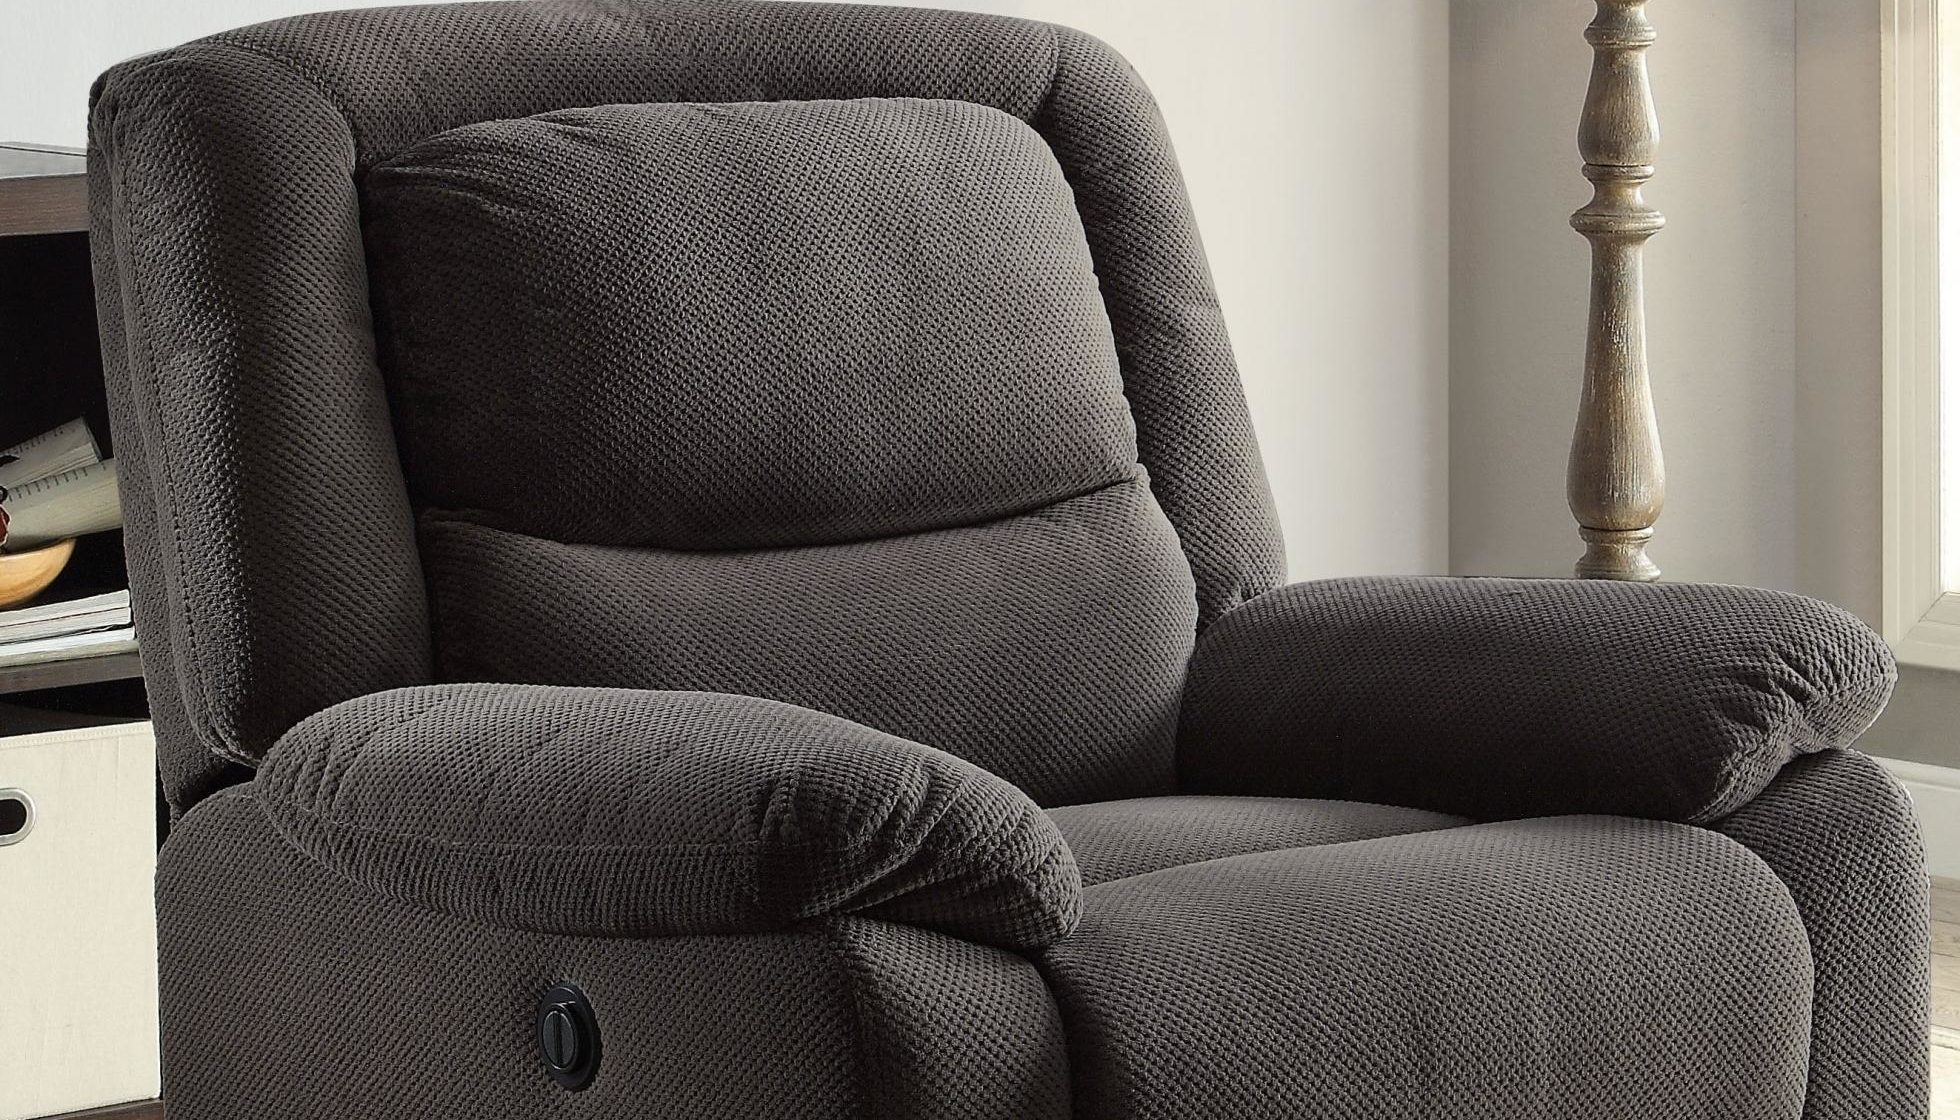 Normally $400, save over $150 when you buy this ultra-comfy recliner Photo via Walmart) 